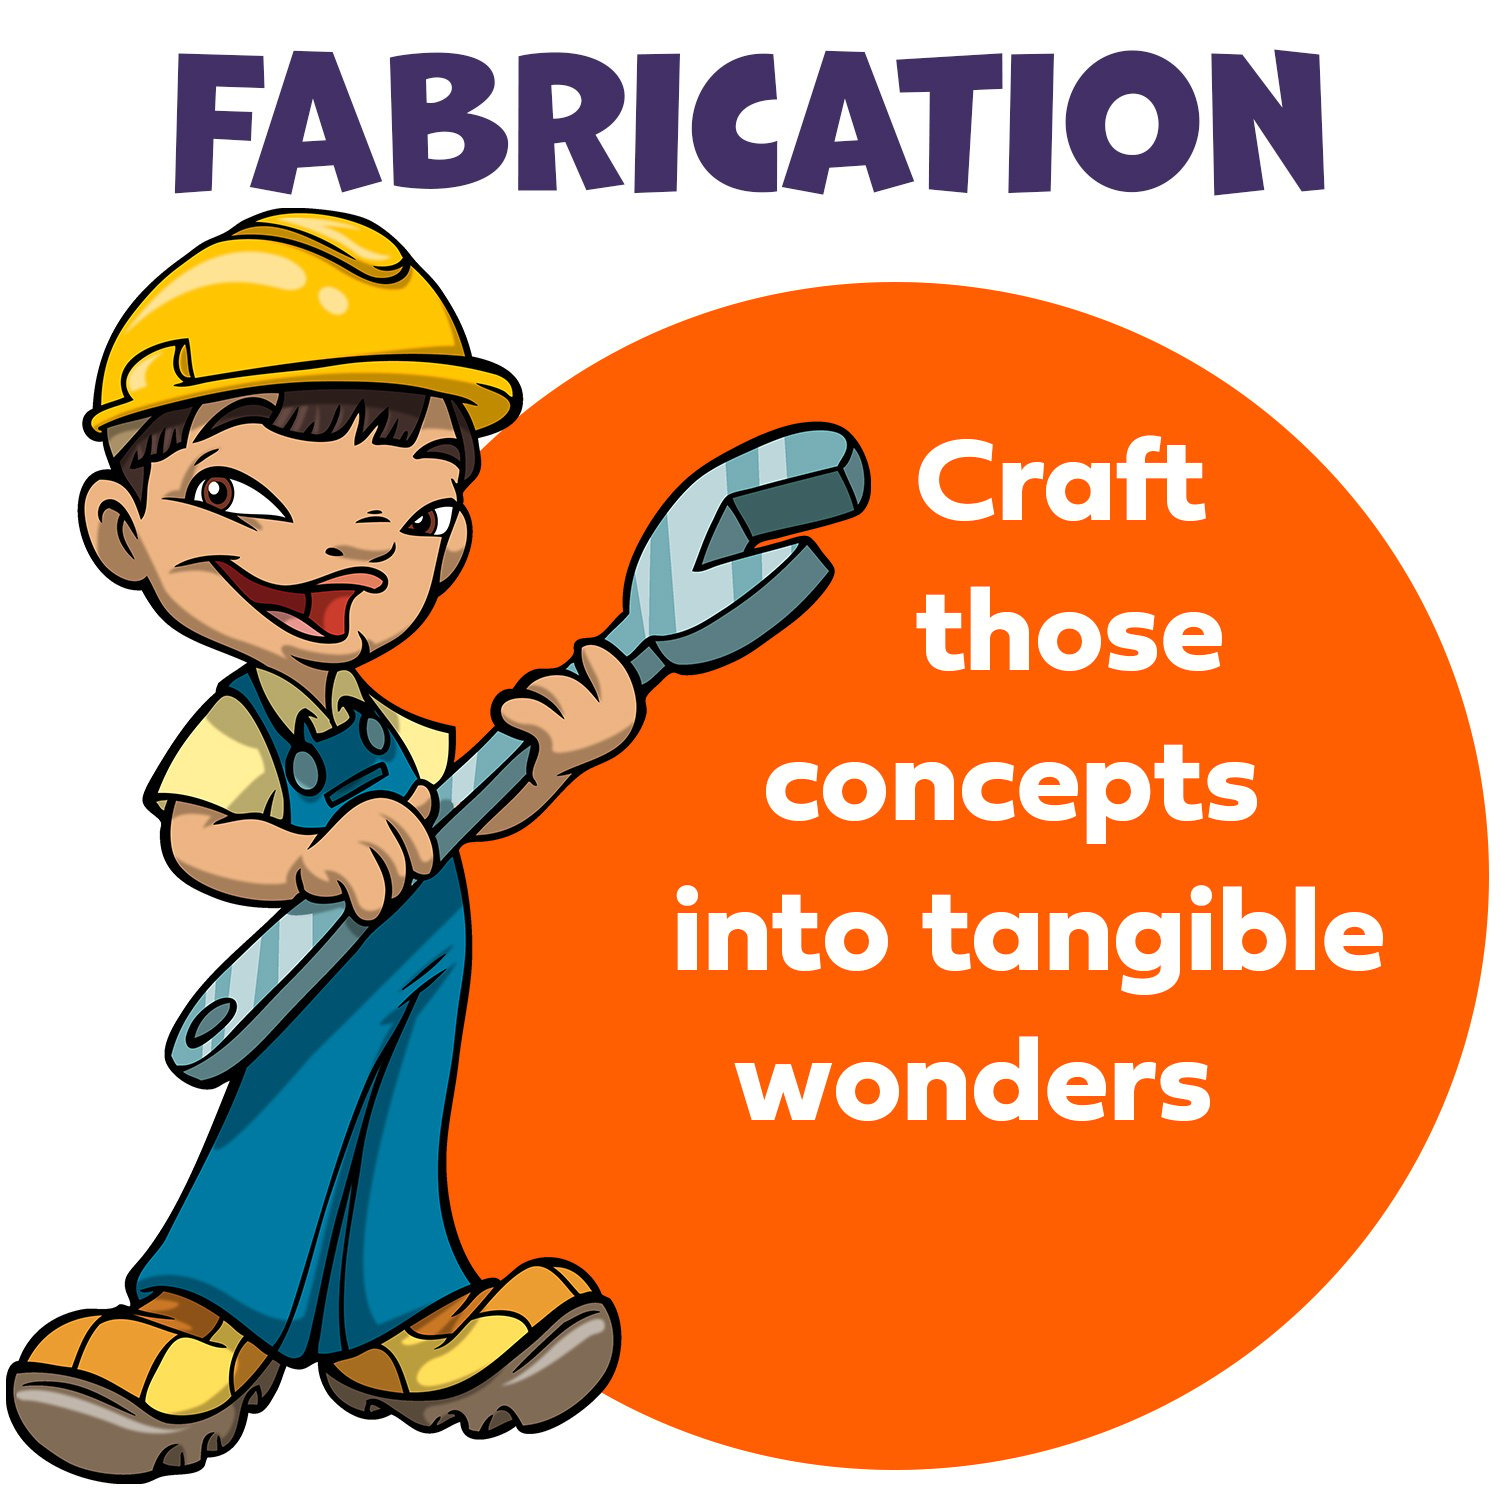 Our Process - Fabrication